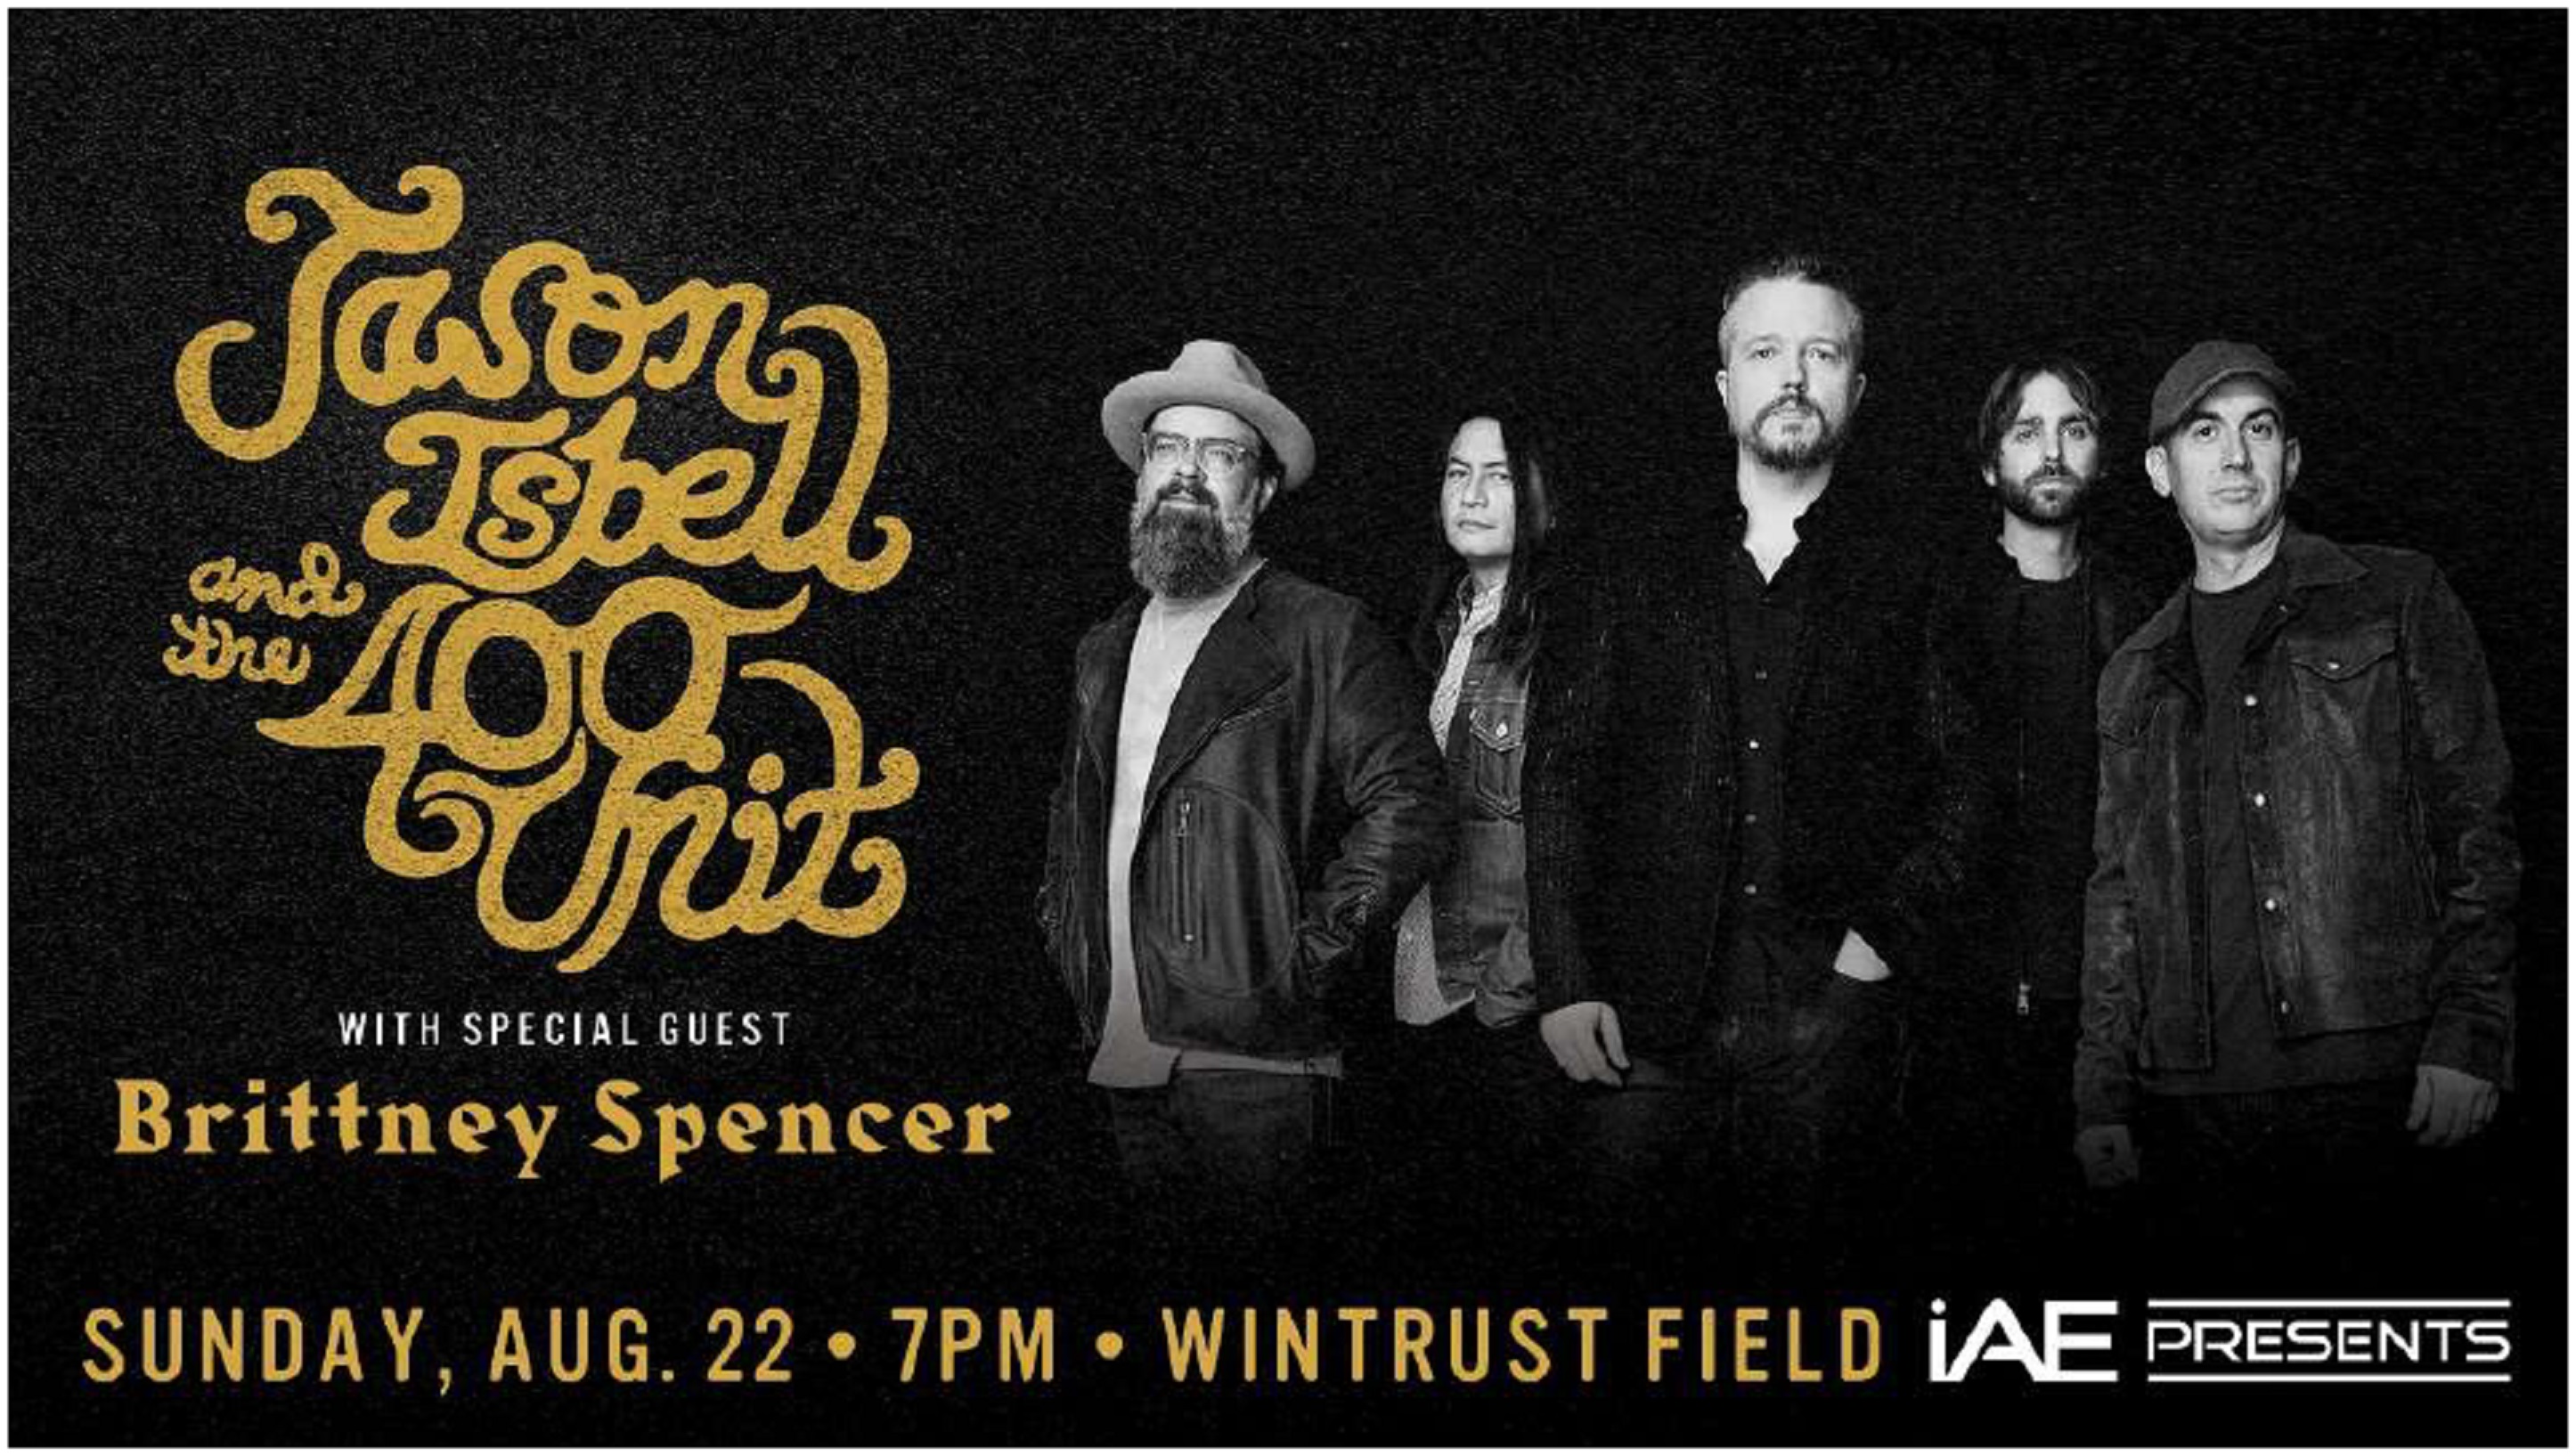 Jason Isbell and the 400 Unit Head to Play Wintrust Field in Schaumburg, IL